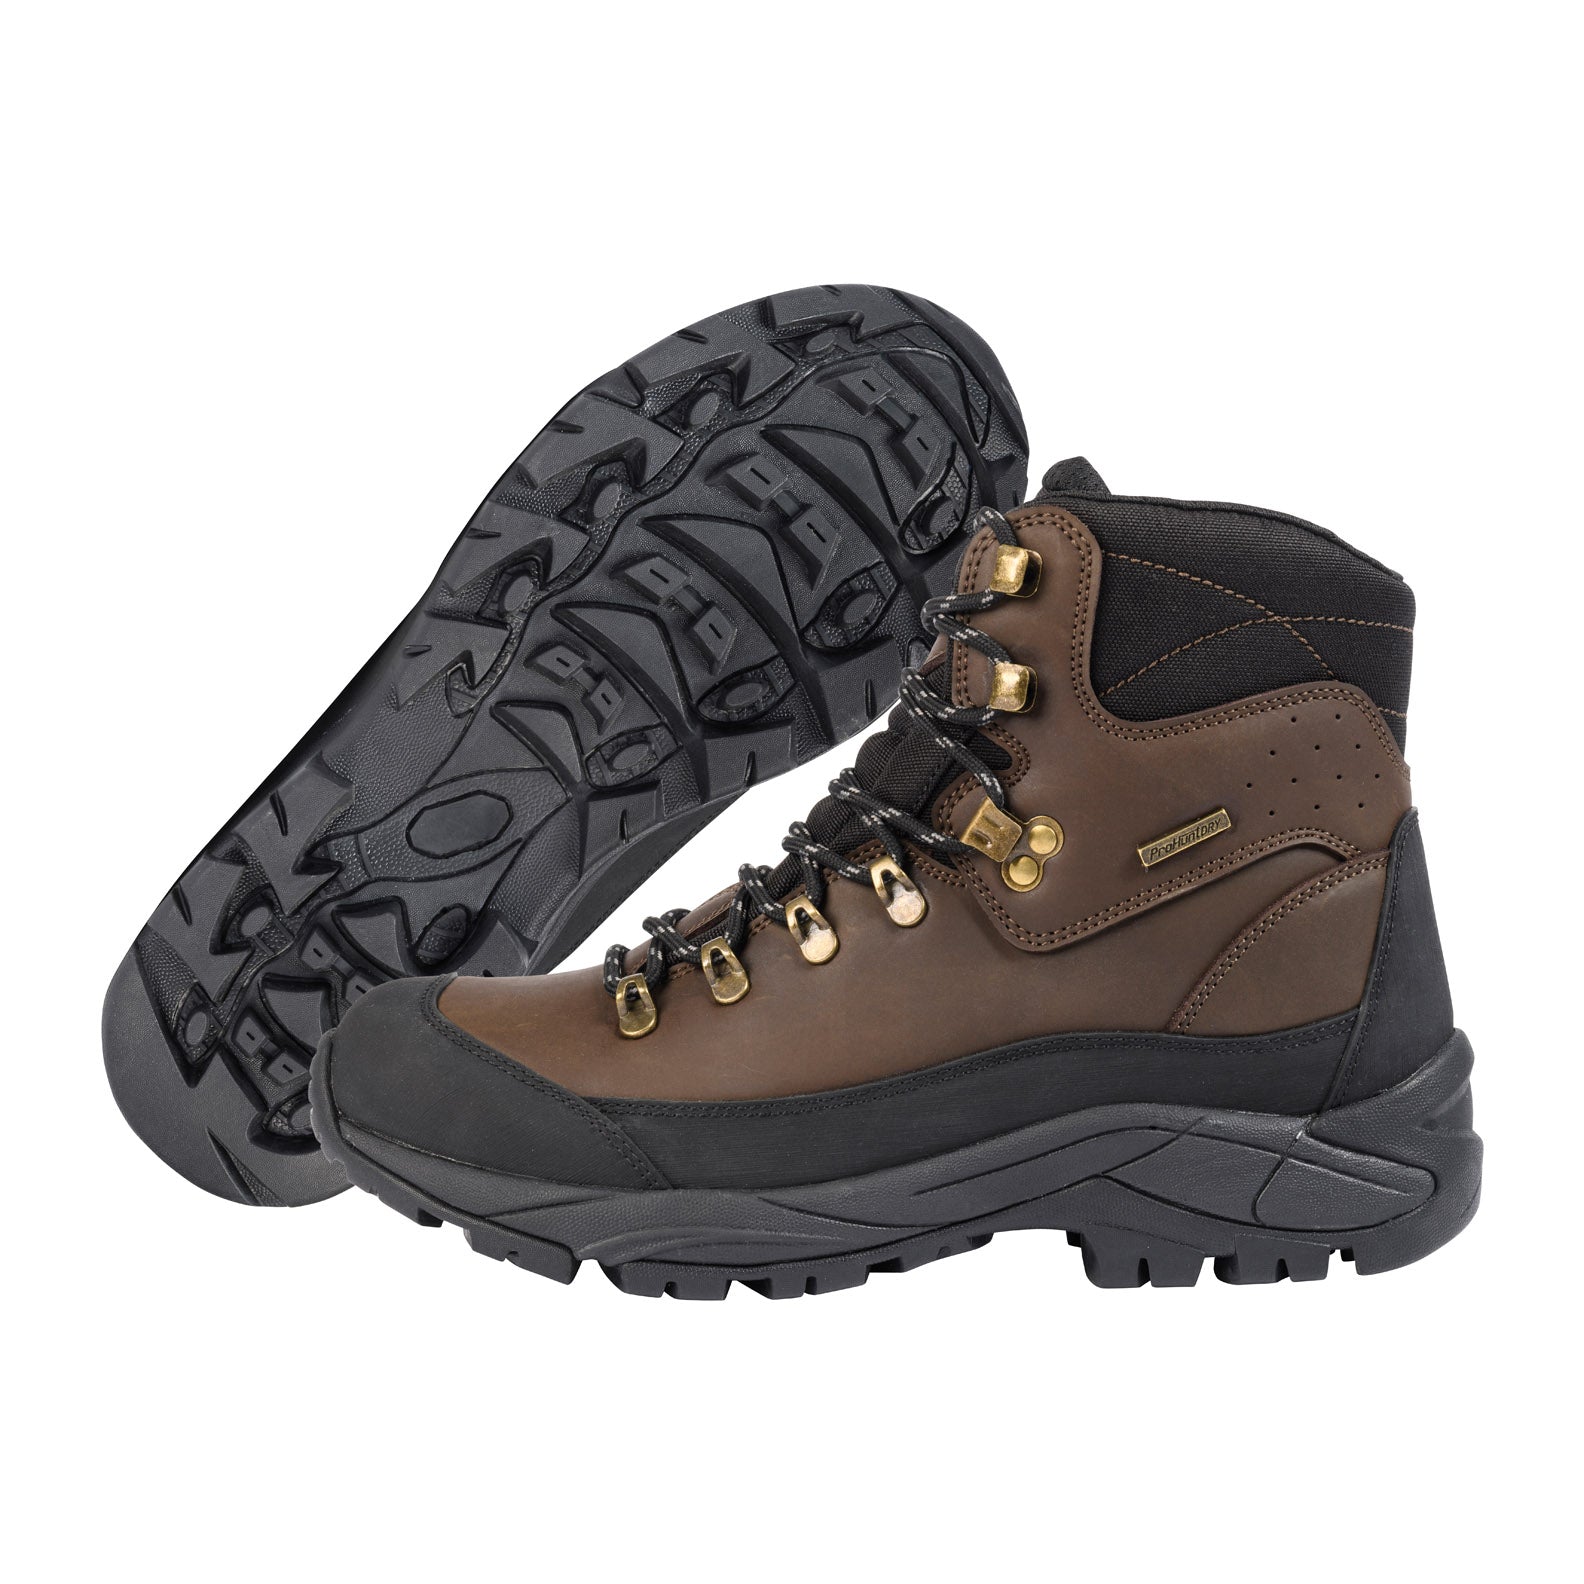 Verney Carron Epervier Boots